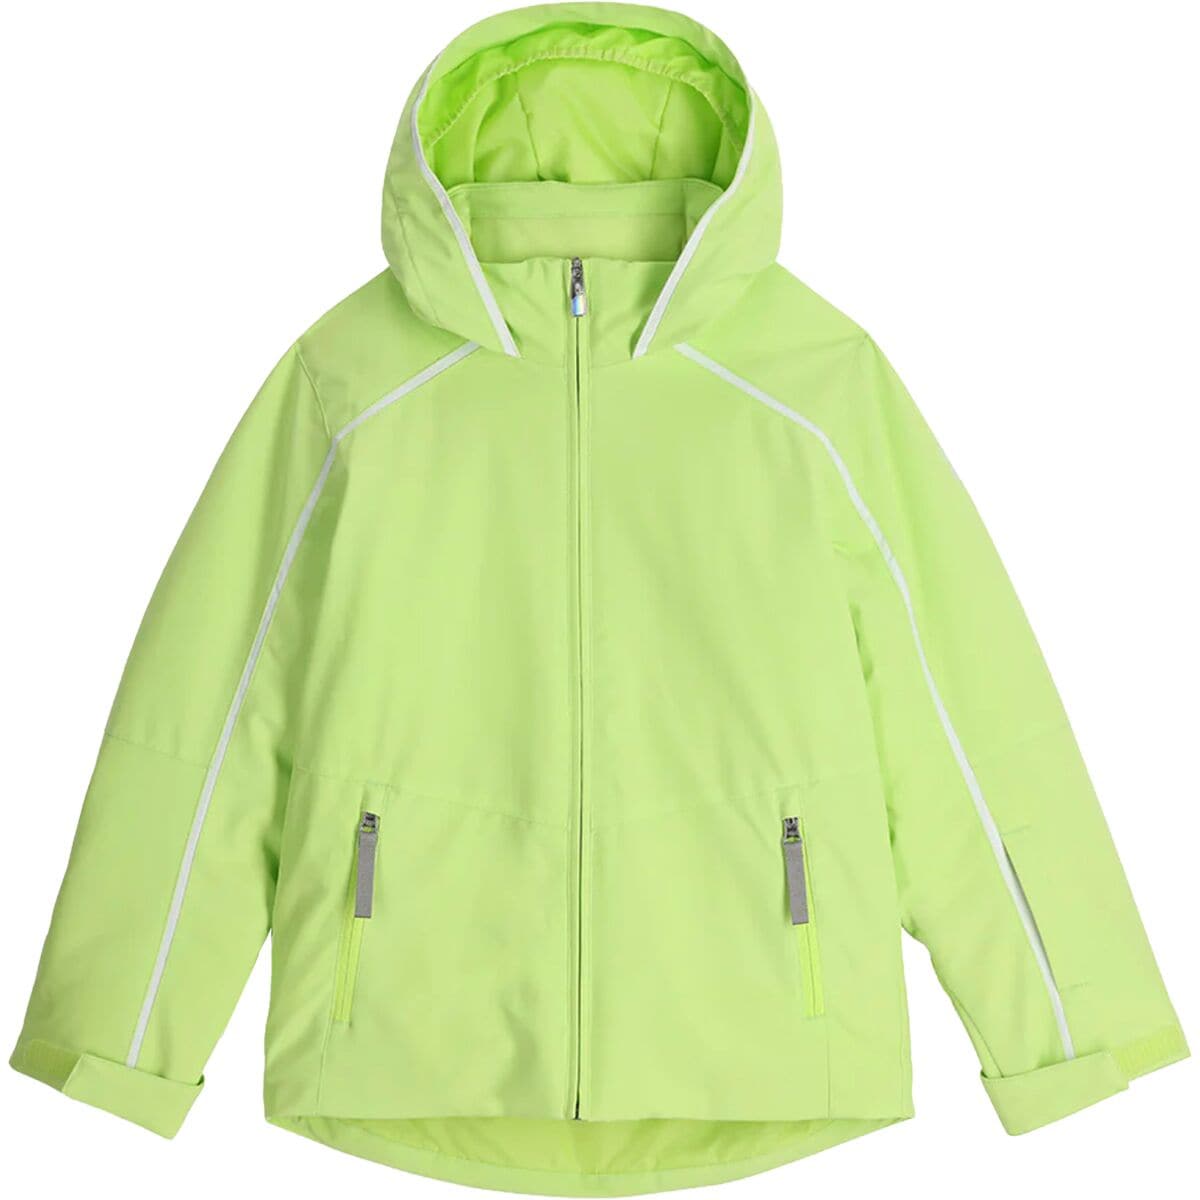 Spyder Conquer Jacket - Kids' Lime Ice